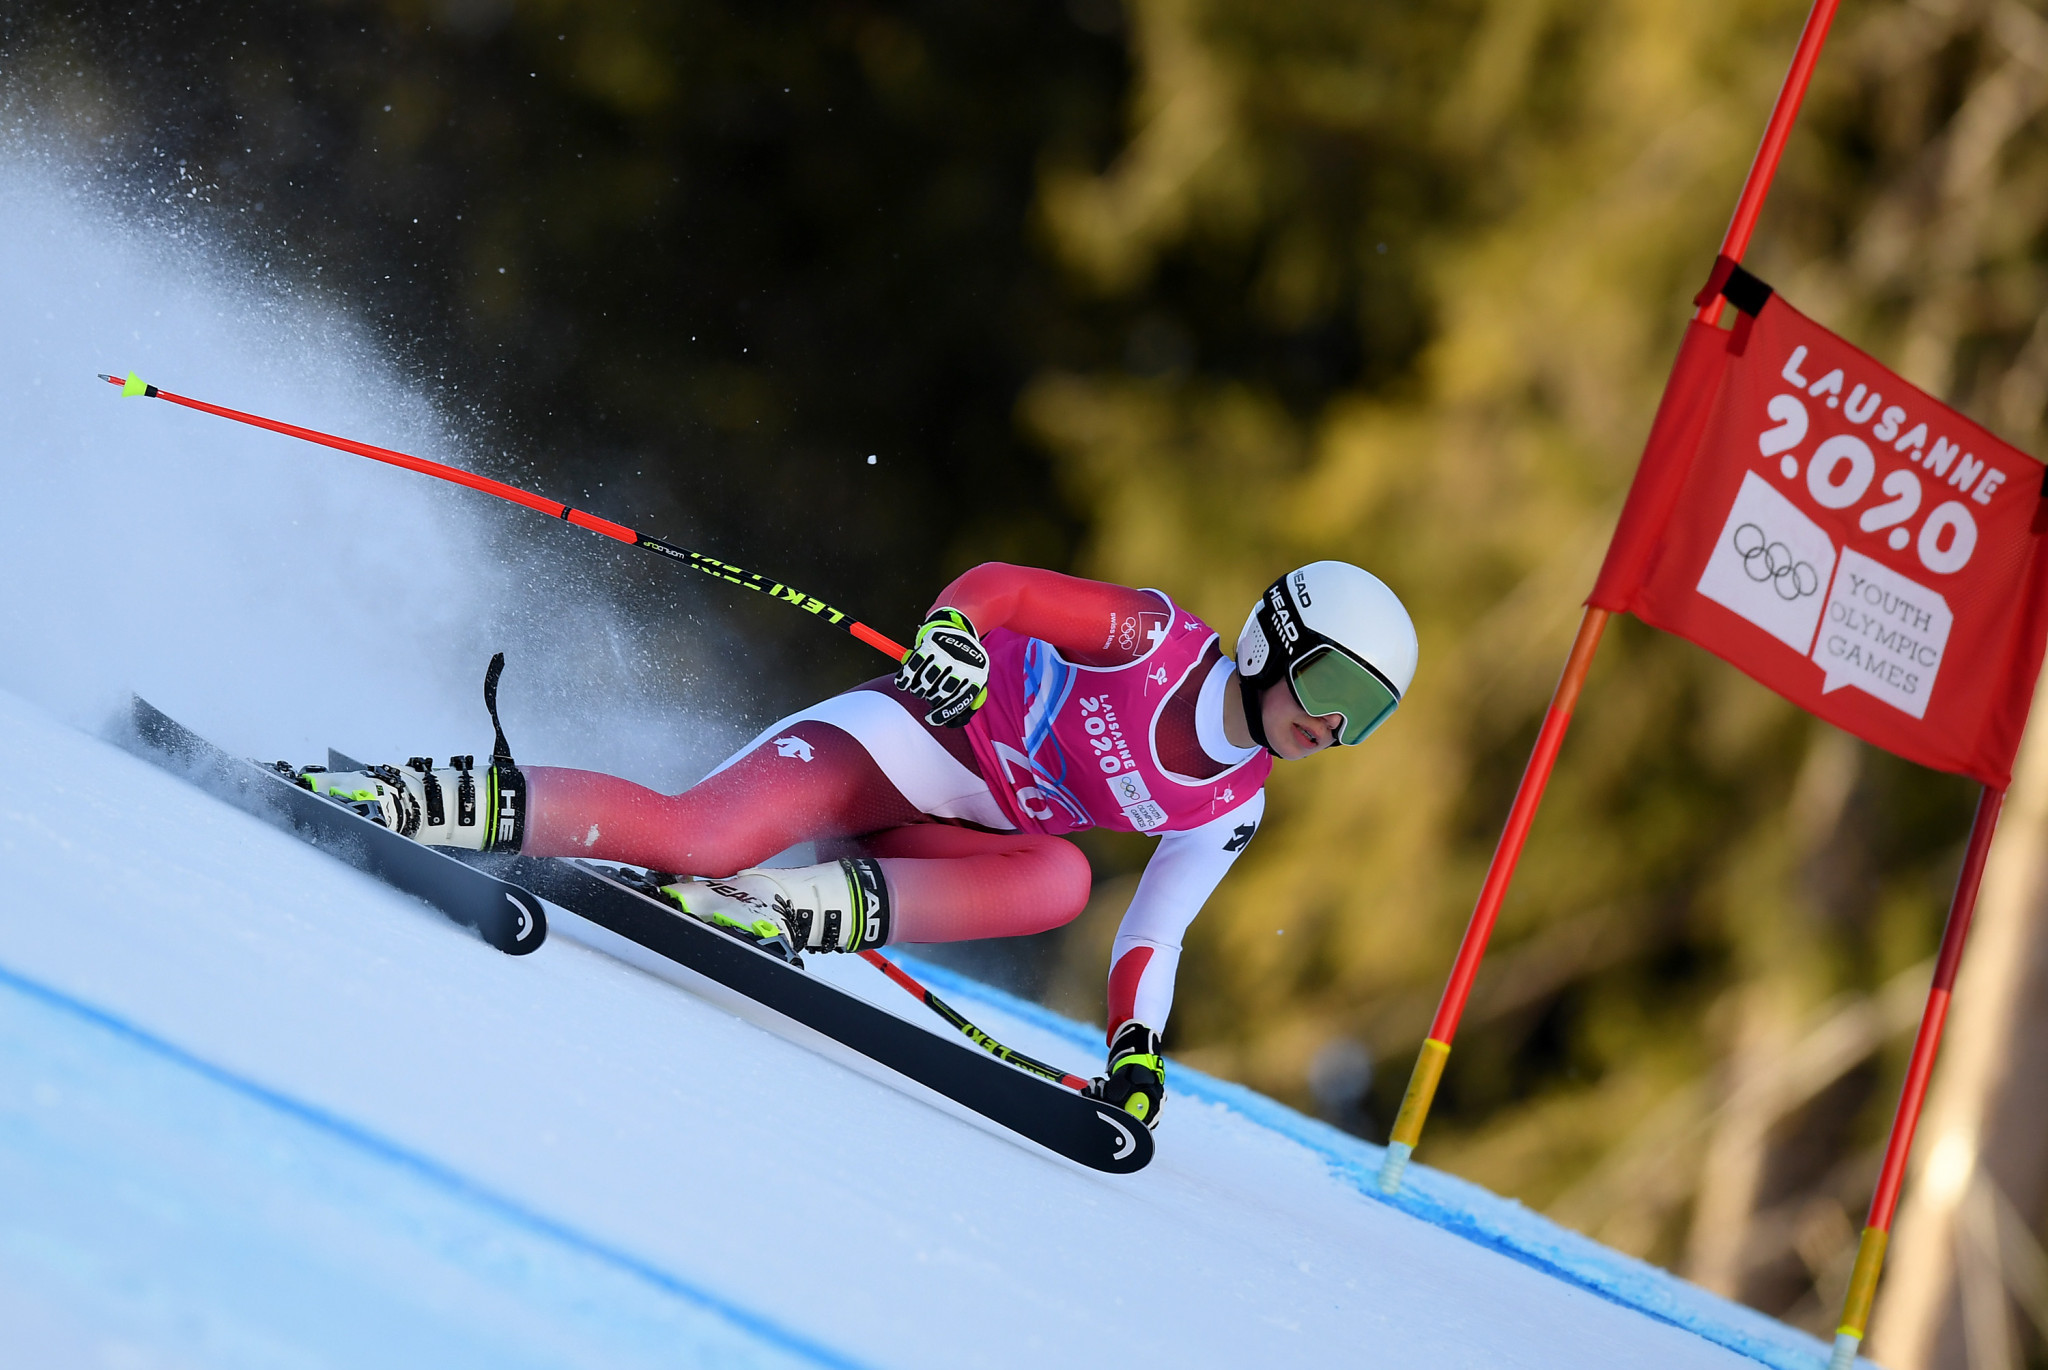 Amelie Klopfenstein of Switzerland was the recipient of the first gold medal of Lausanne 2020, winning the women's Super-G ©Getty Images